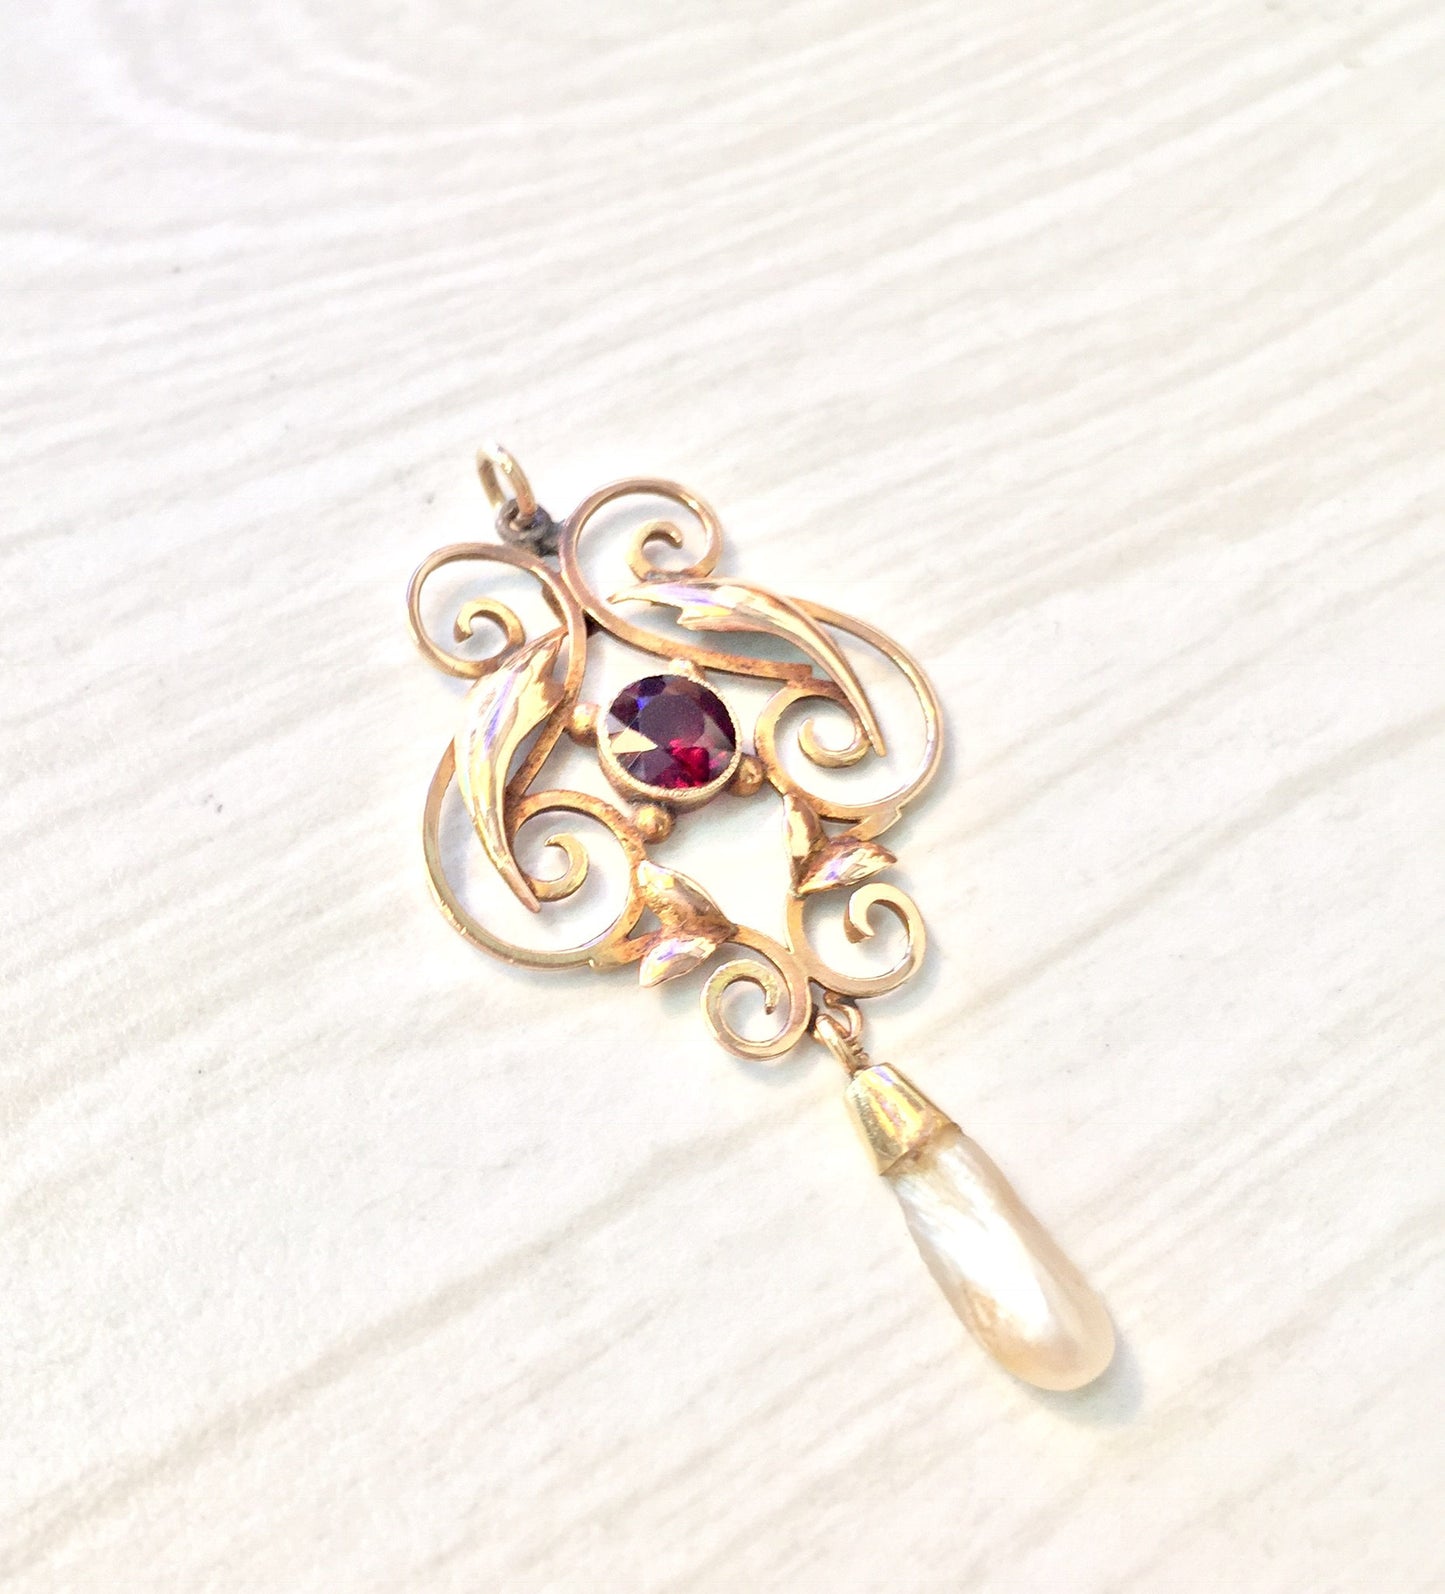 Antique 10K gold pendant featuring intricate swirl design with a dangling teardrop fresh water pearl and a purple amethyst gemstone accent.